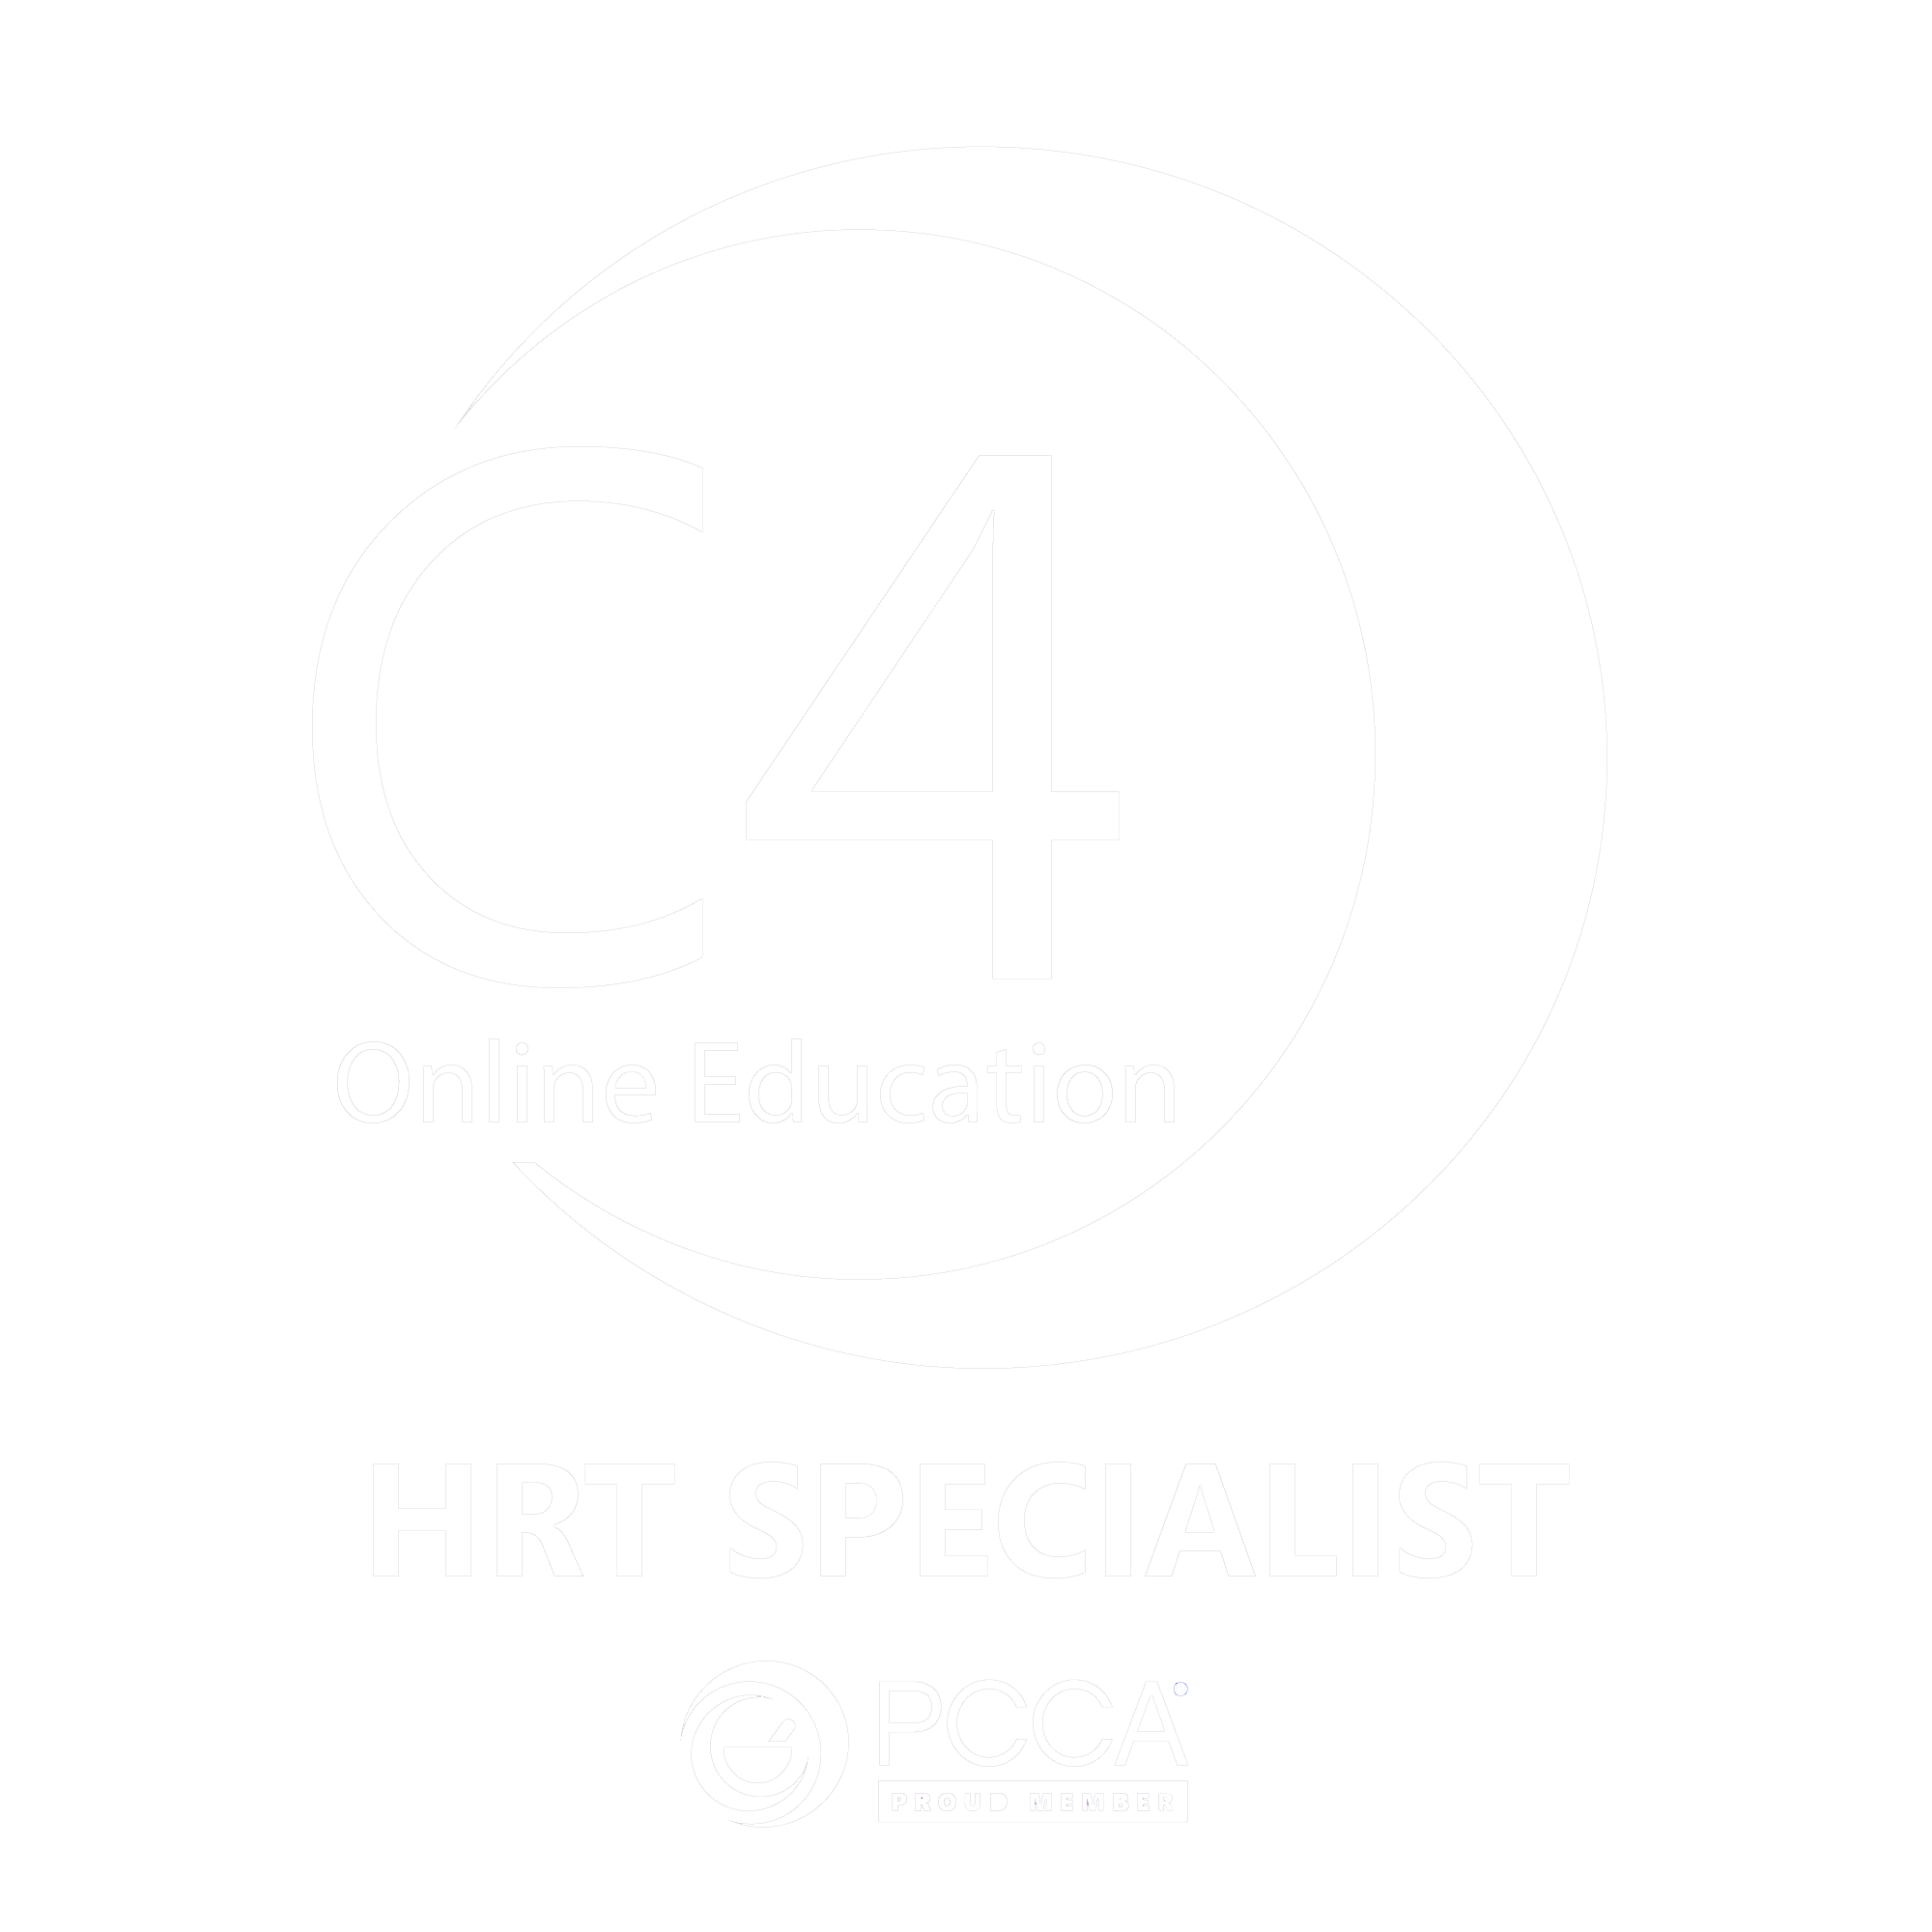 C4 hrtspecialist with logo space removed